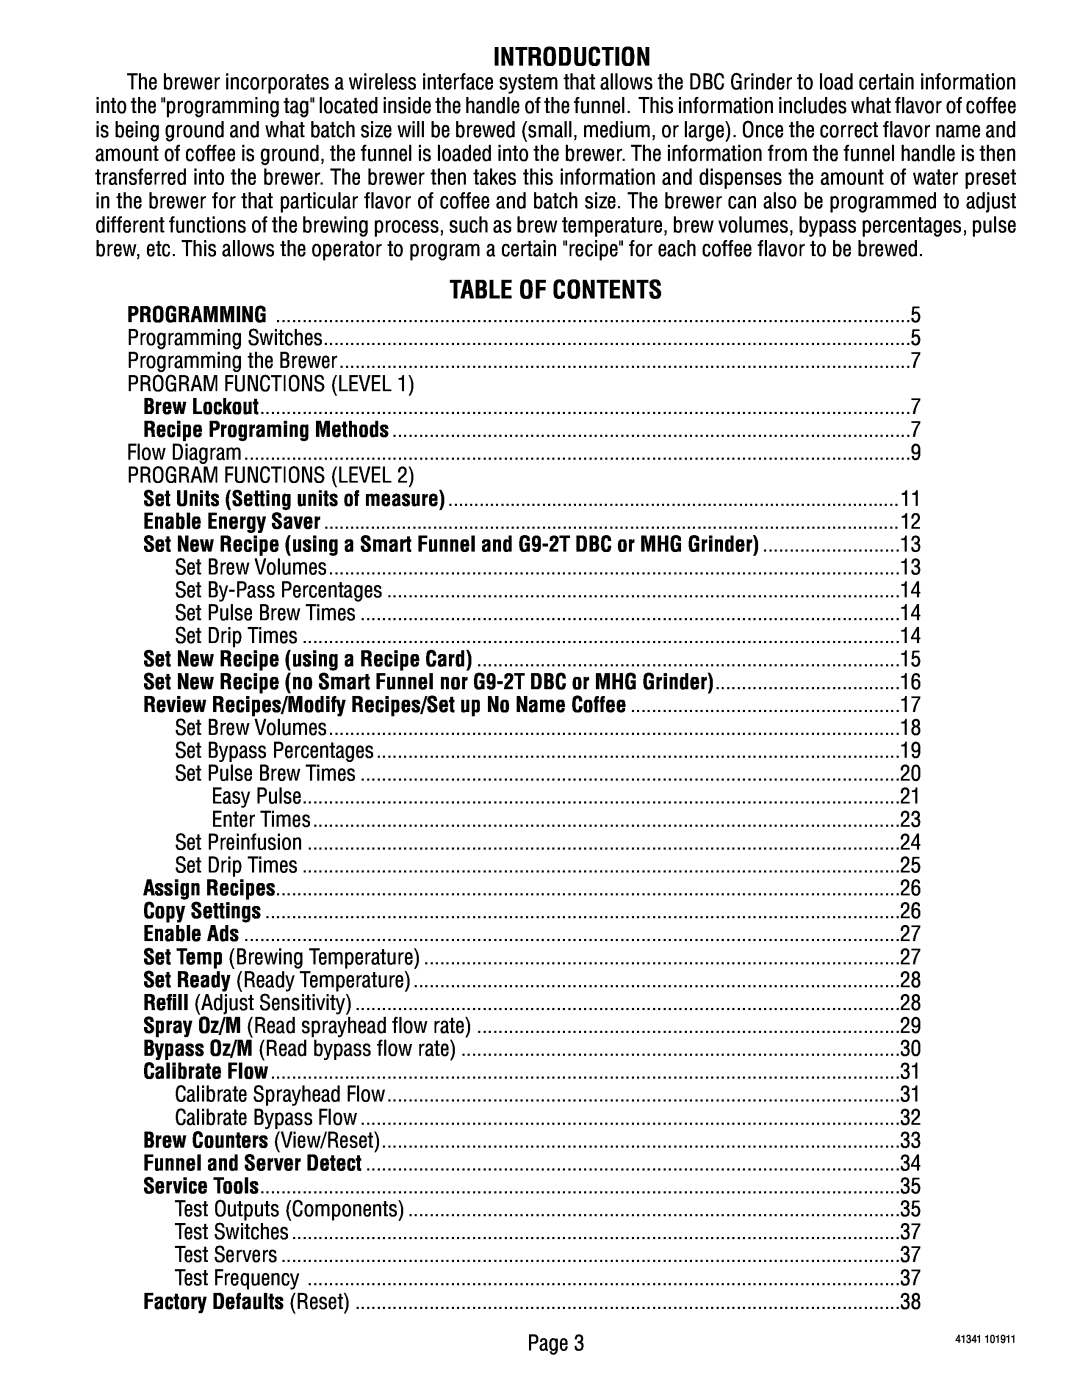 Bunn SNG0033000 manual Introduction, Table Of Contents 